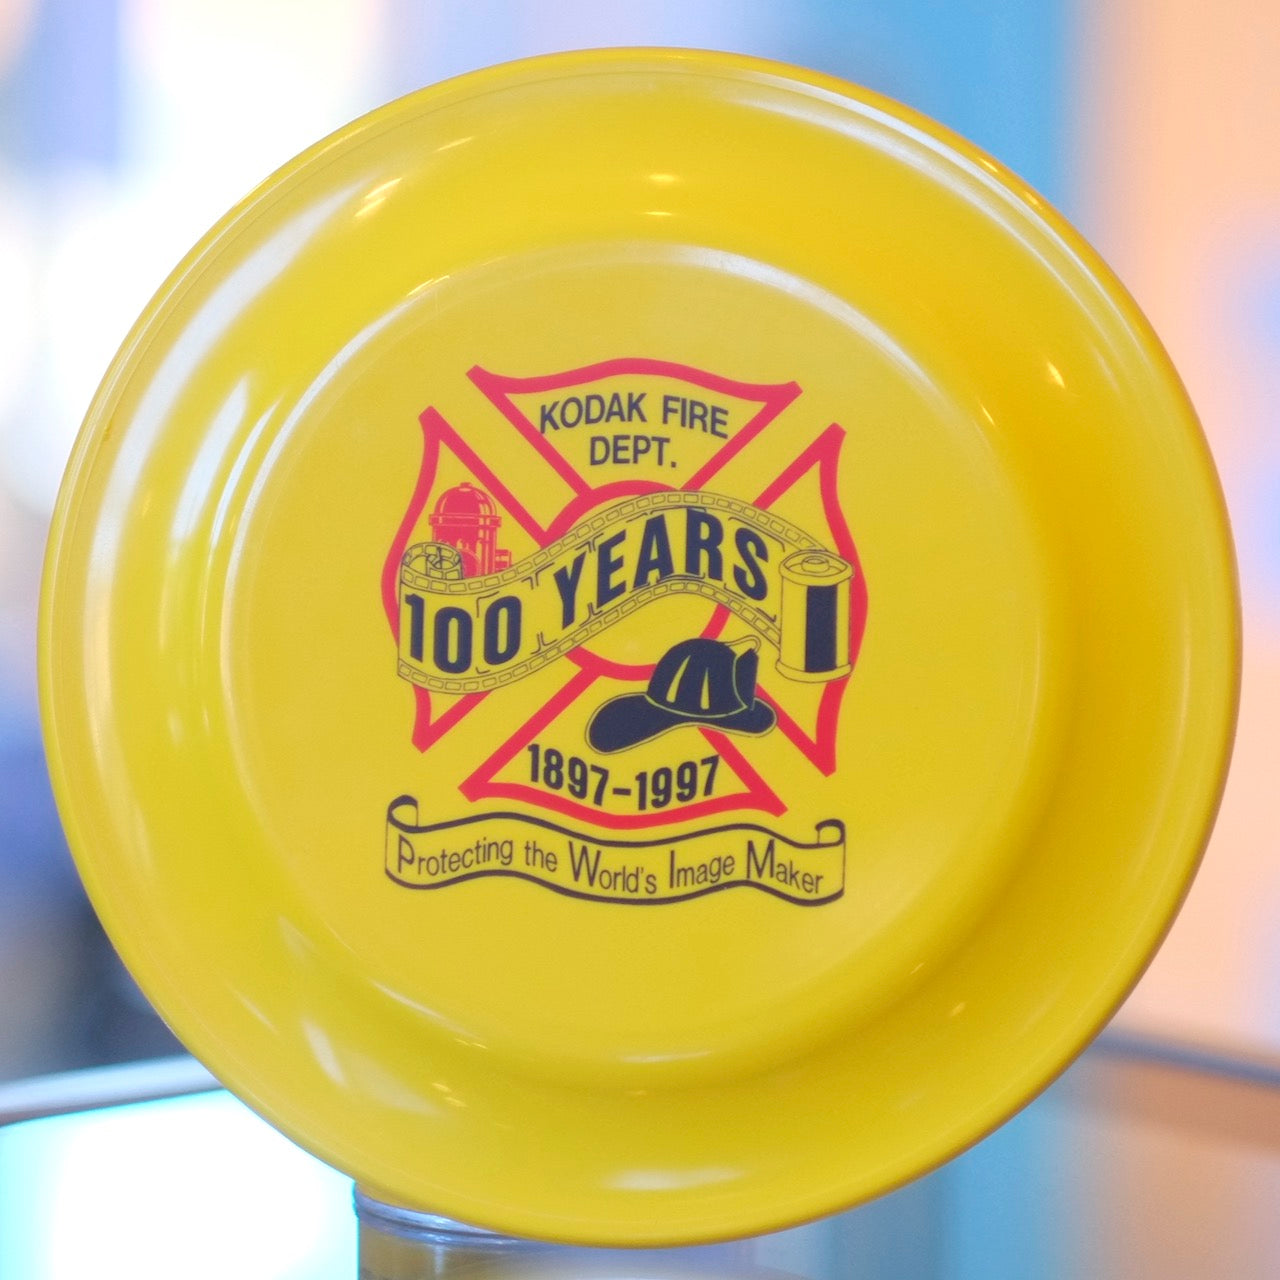 Kodak Fire Department "100 Years" Frisbee-style disc product